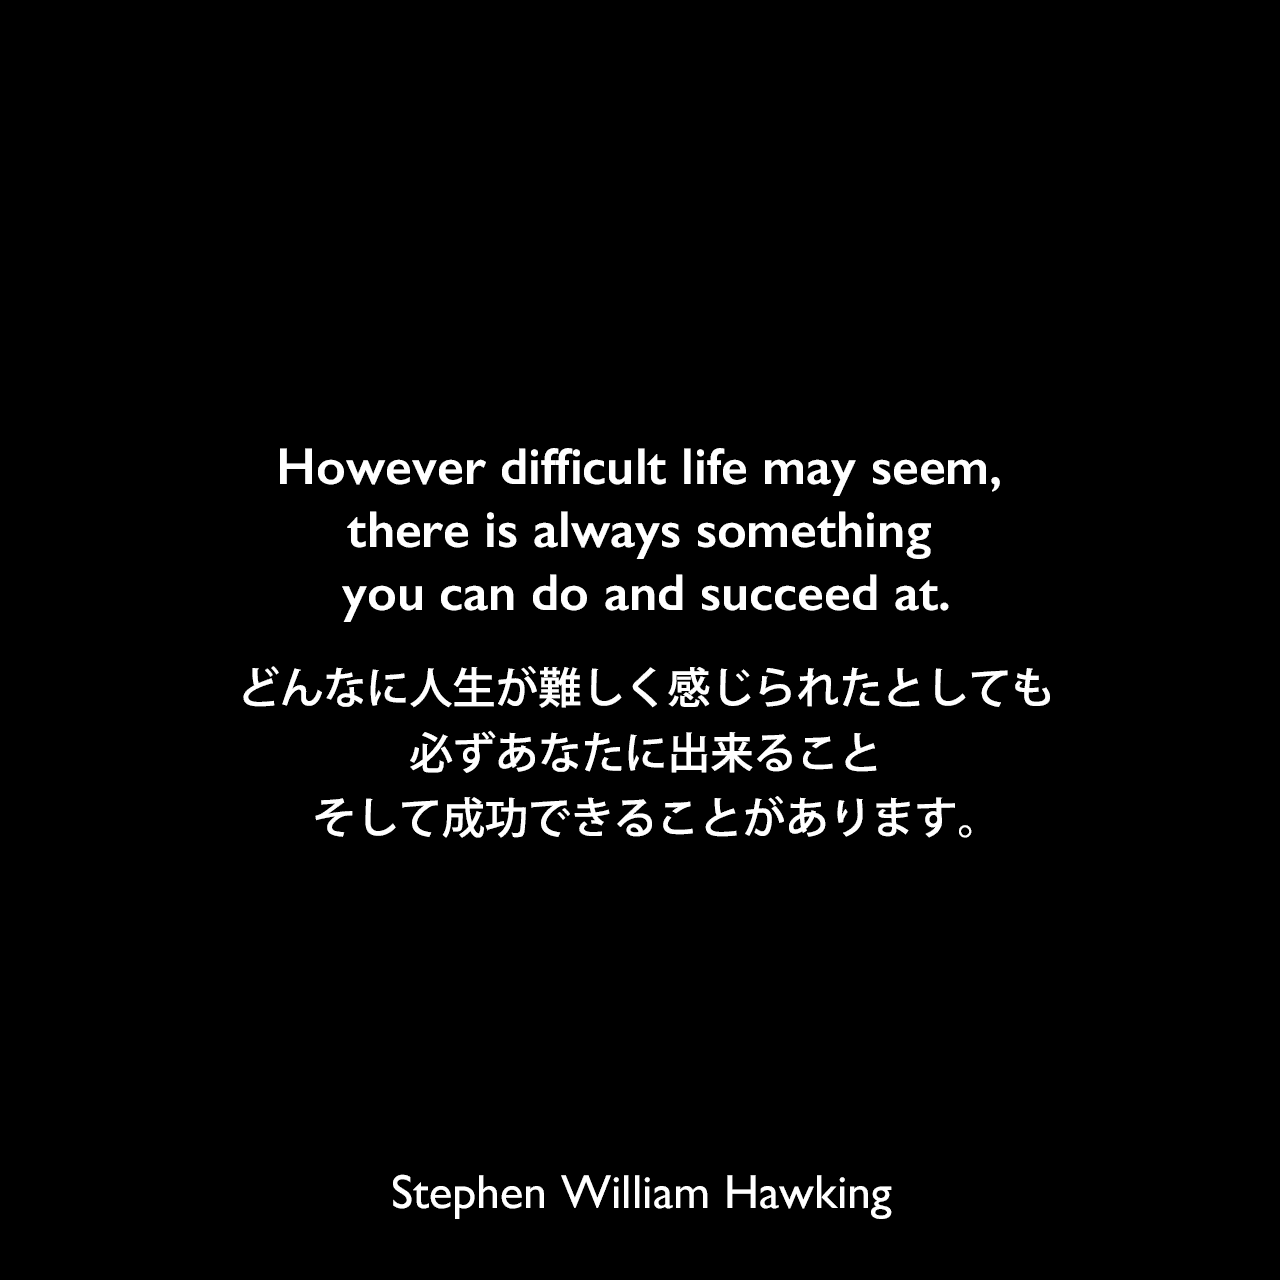 However difficult life may seem, there is always something you can do and succeed at.どんなに人生が難しく感じられたとしても、必ずあなたに出来ること、そして成功できることがあります。